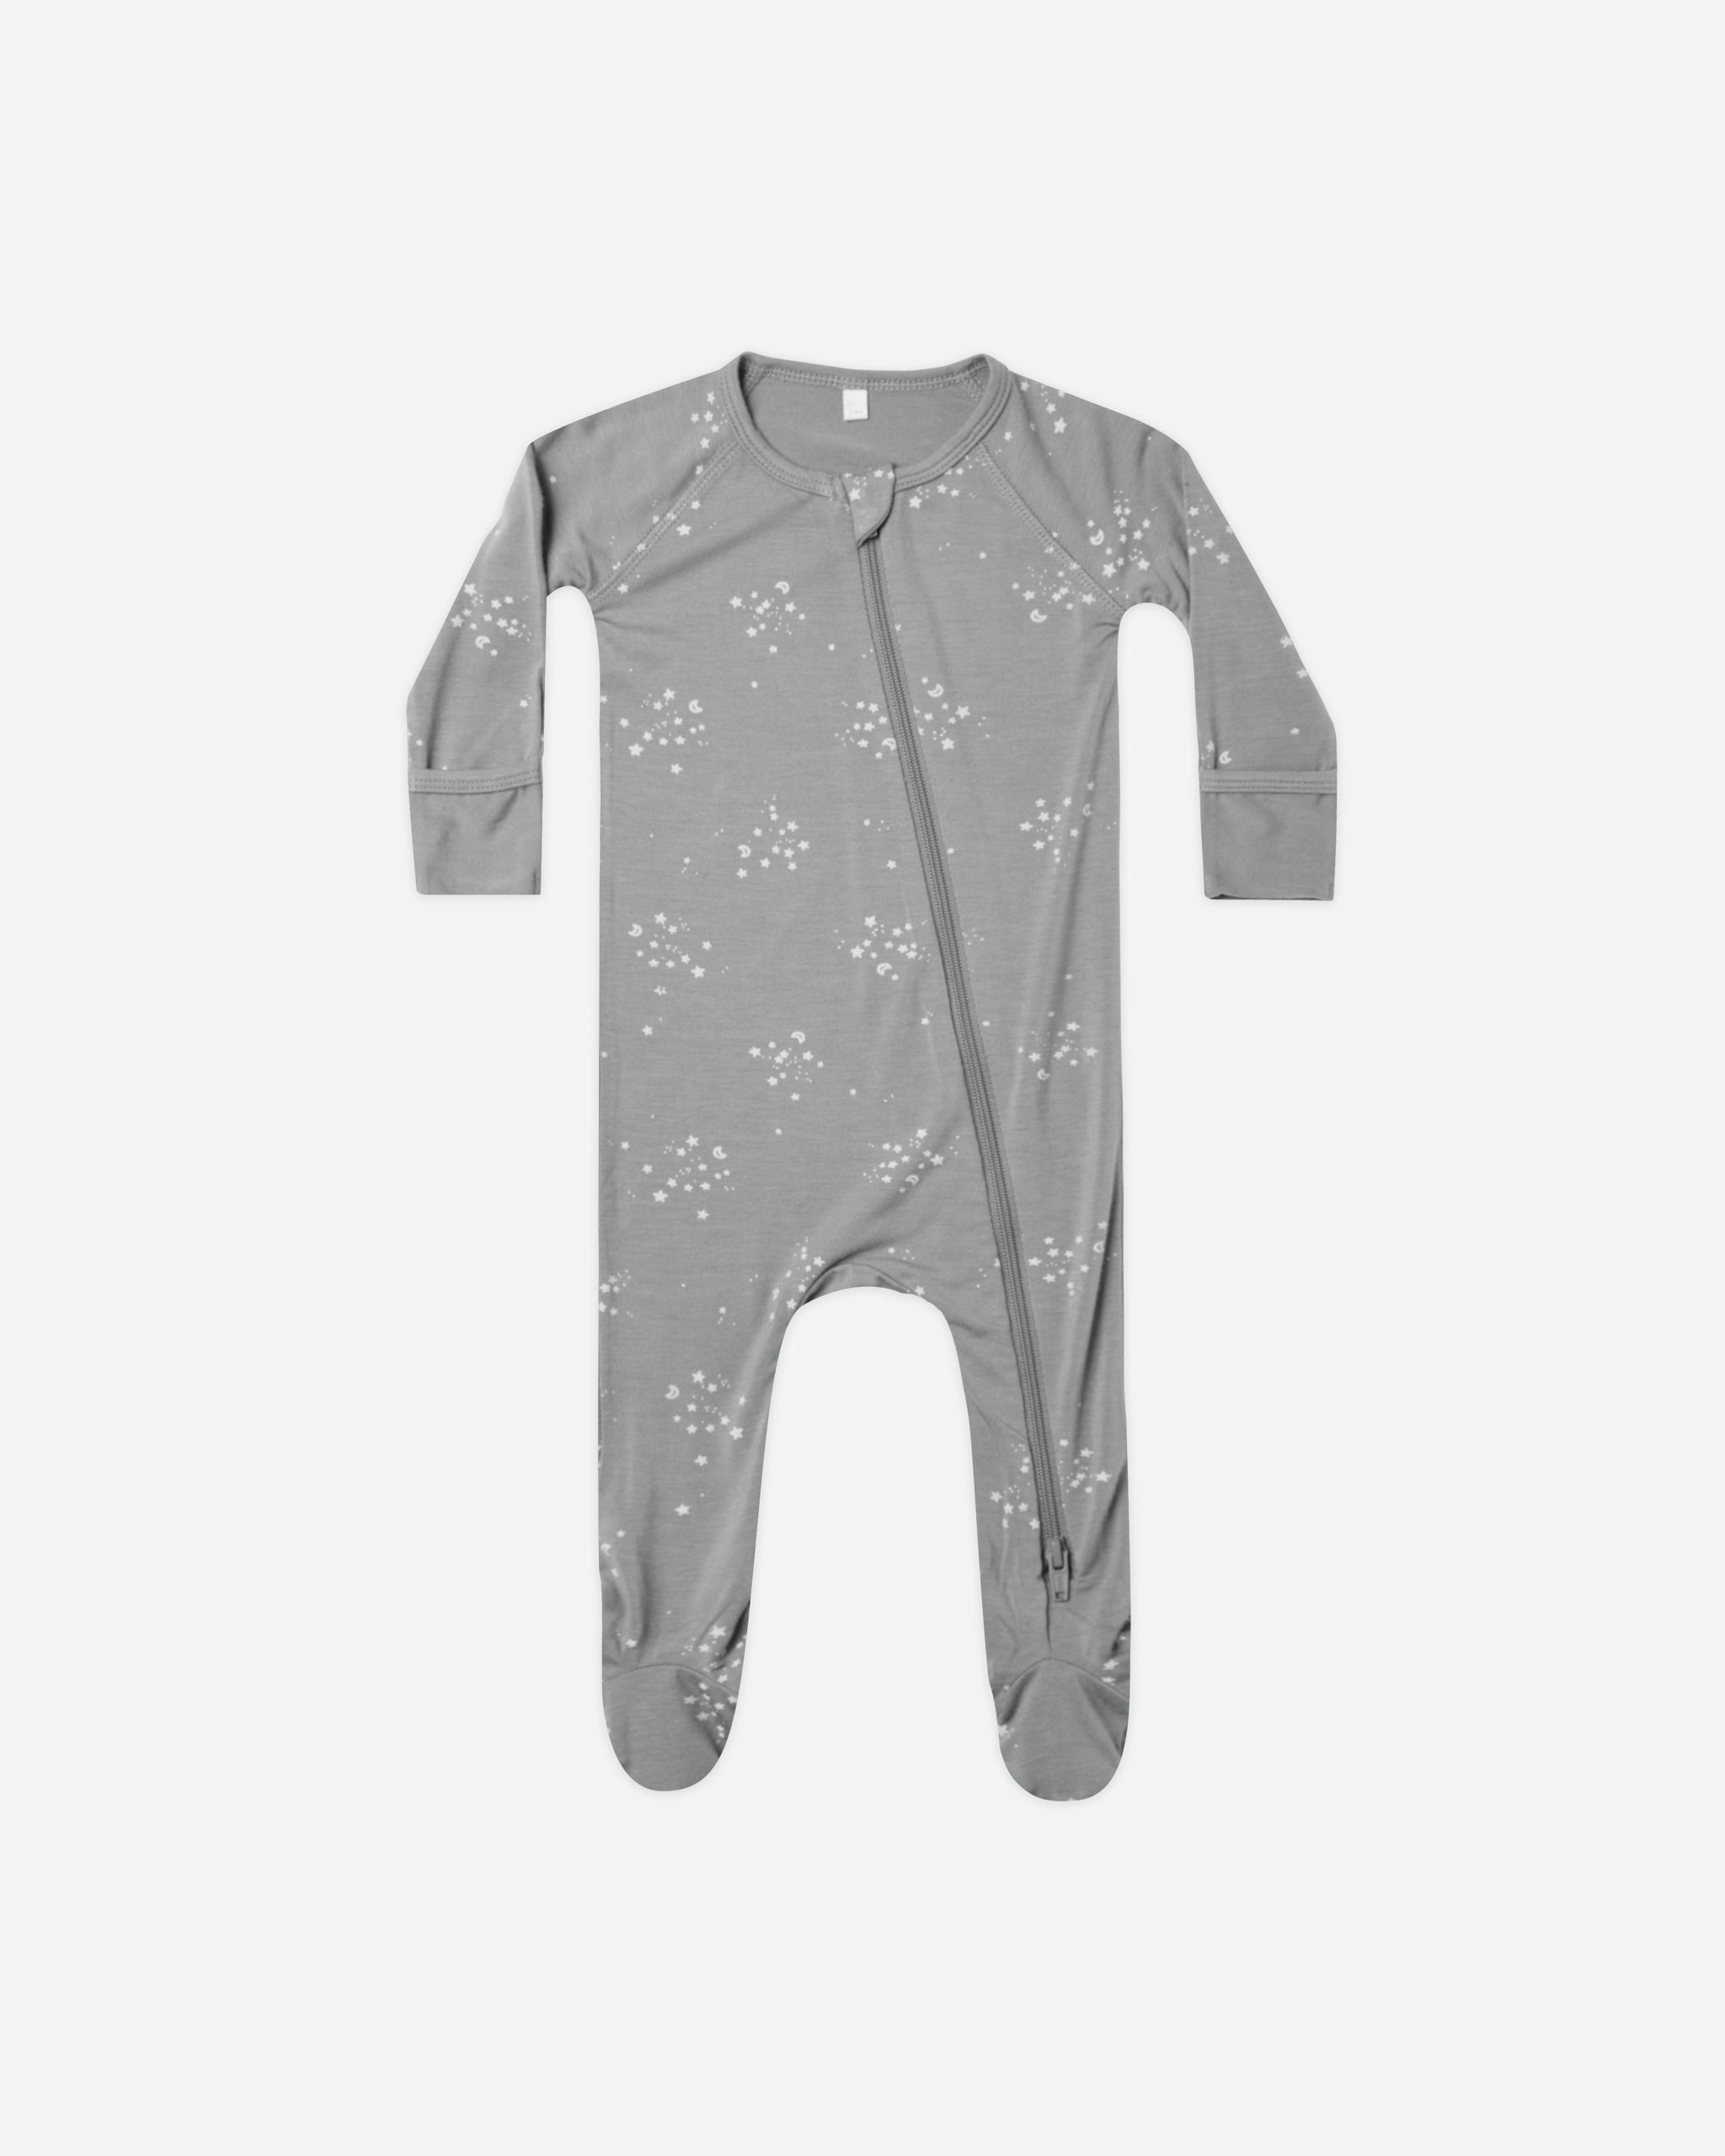 Bamboo Zip Footie || Twinkle - Rylee + Cru | Kids Clothes | Trendy Baby Clothes | Modern Infant Outfits |